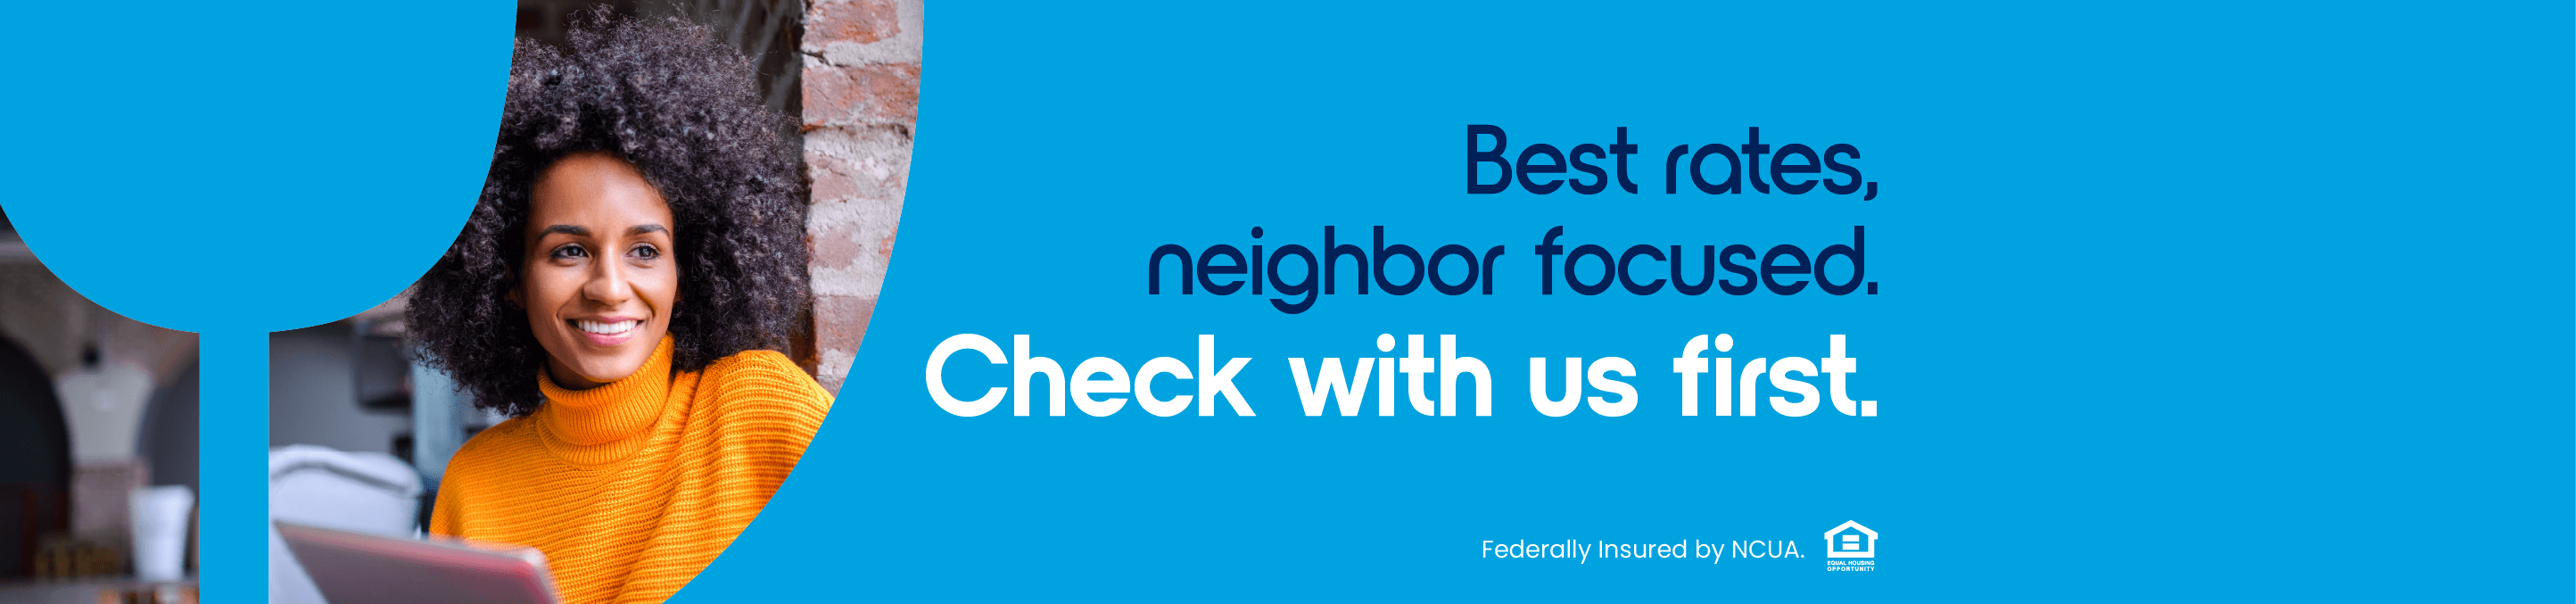 Best rates. Neighbor focused. Check with us first.